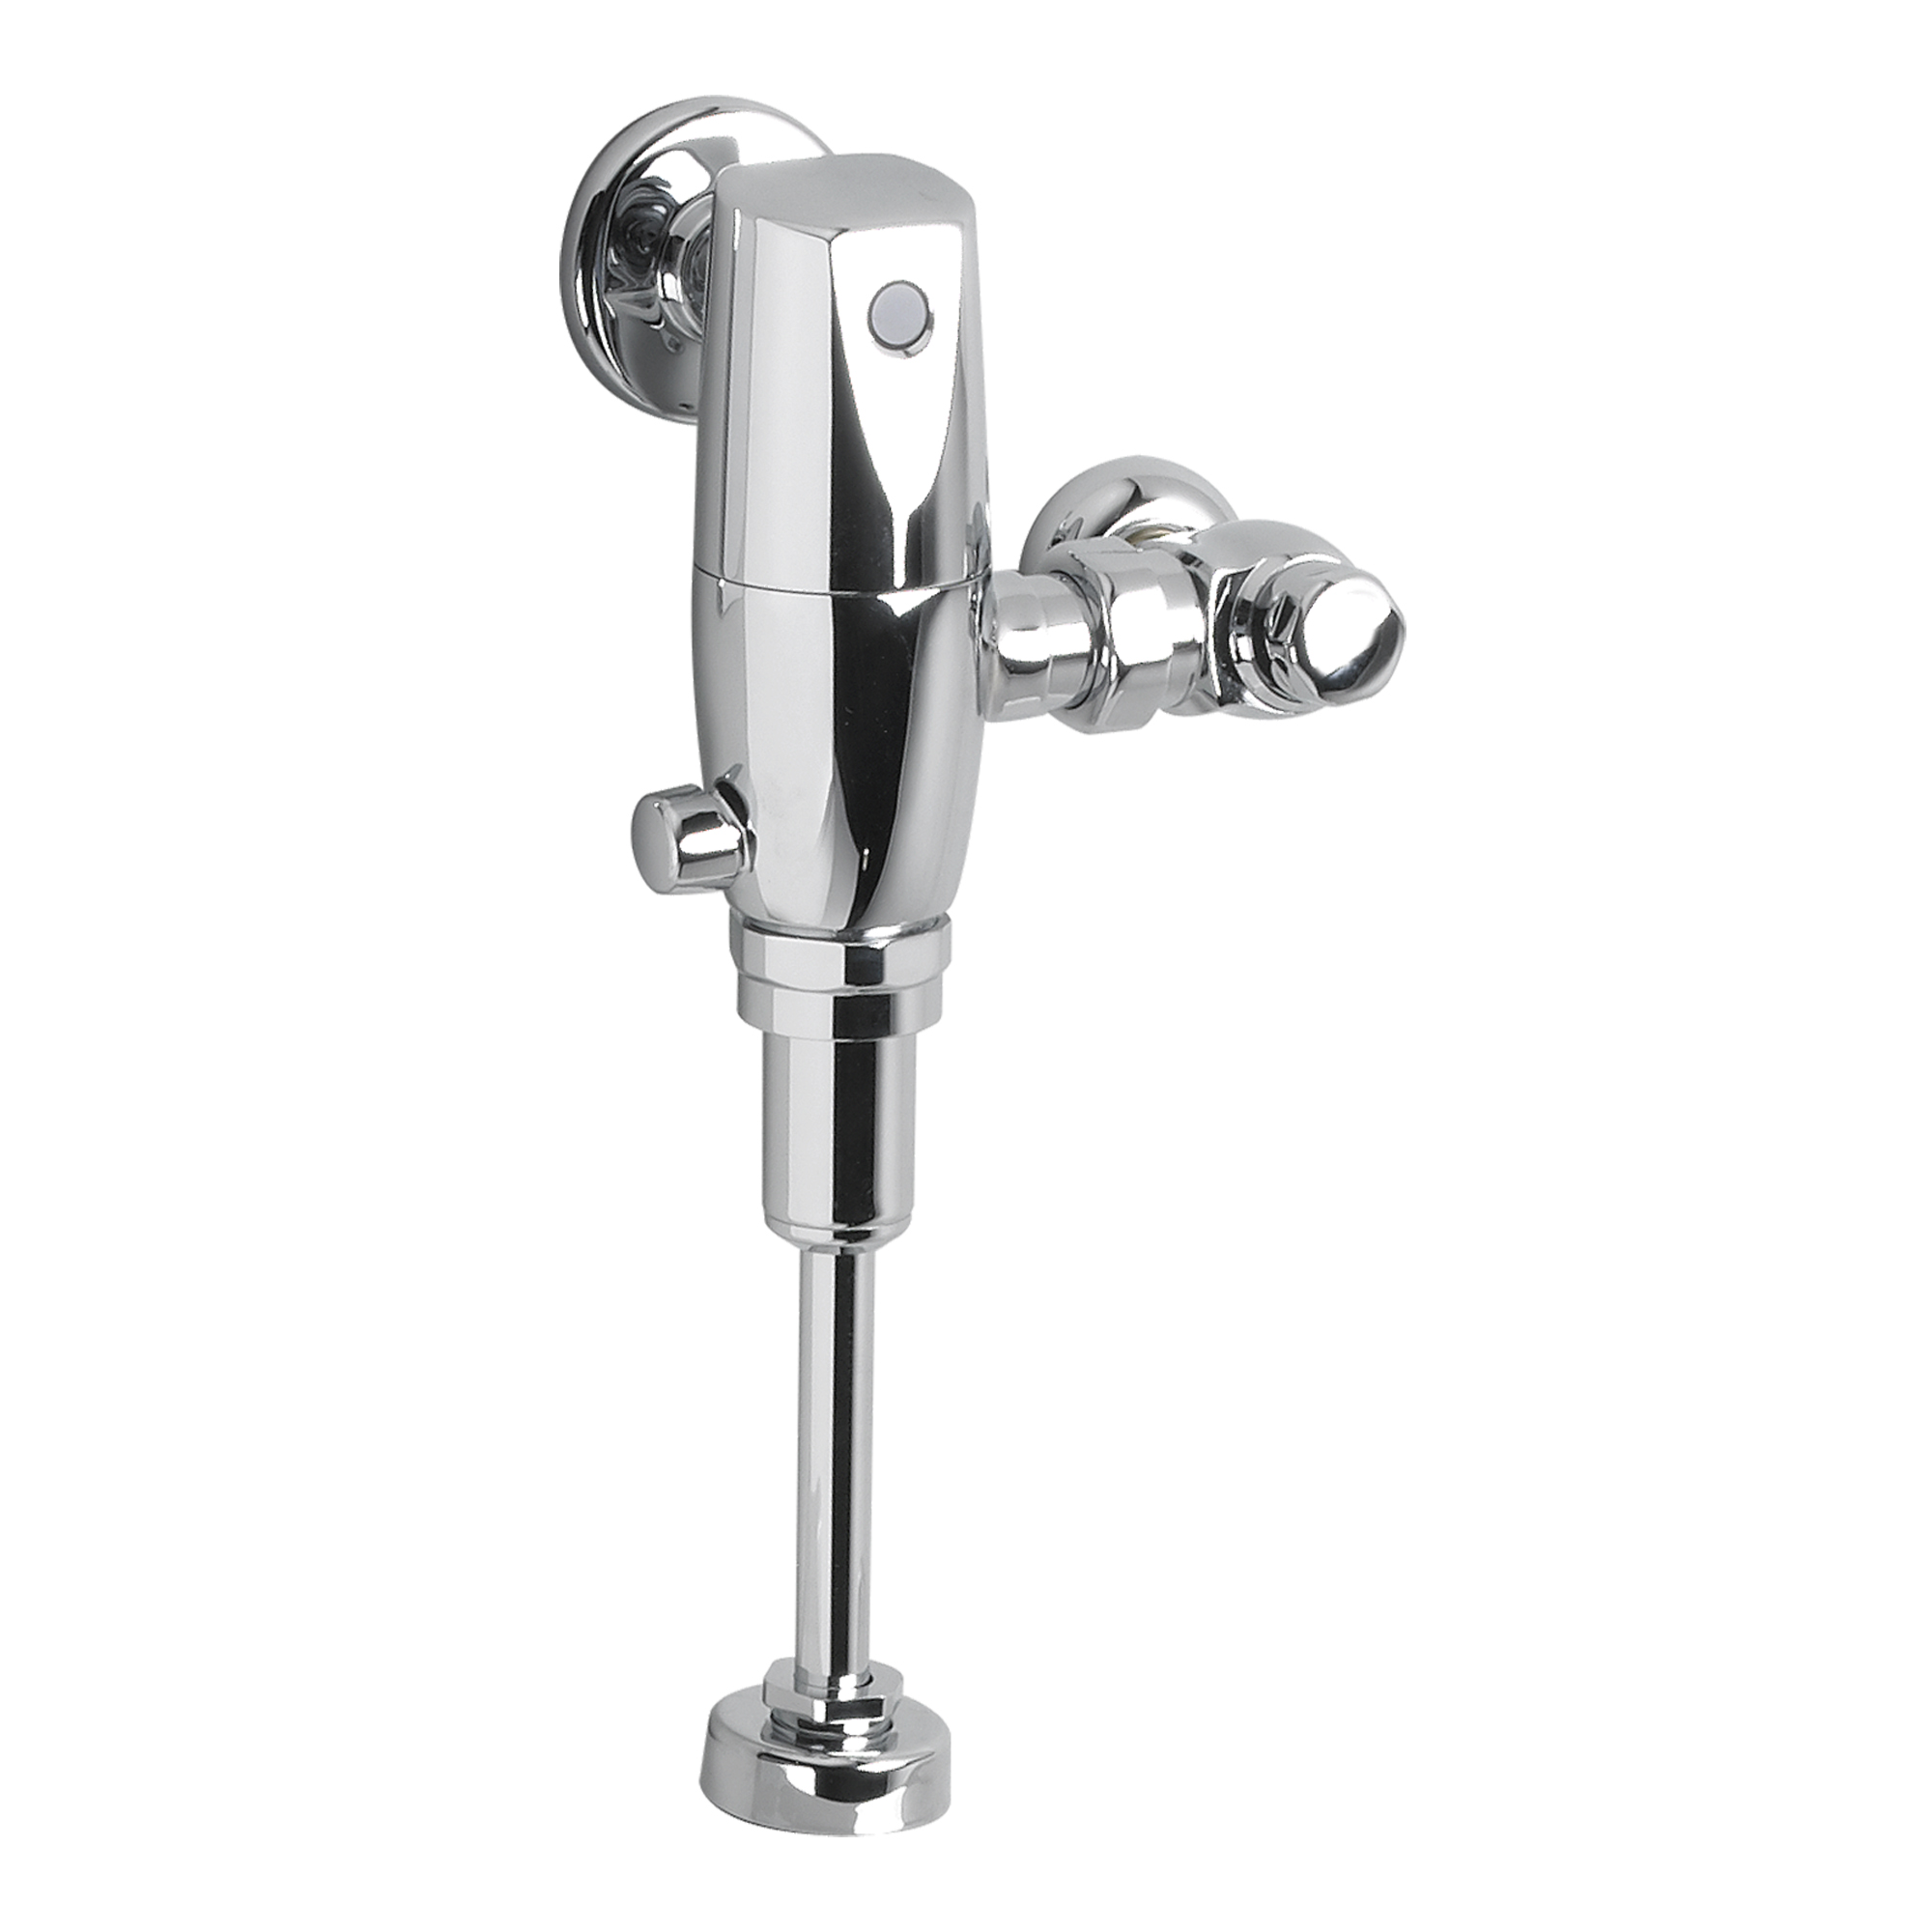 American Standard - Ultima™ Selectronic Touchless Toilet Flush